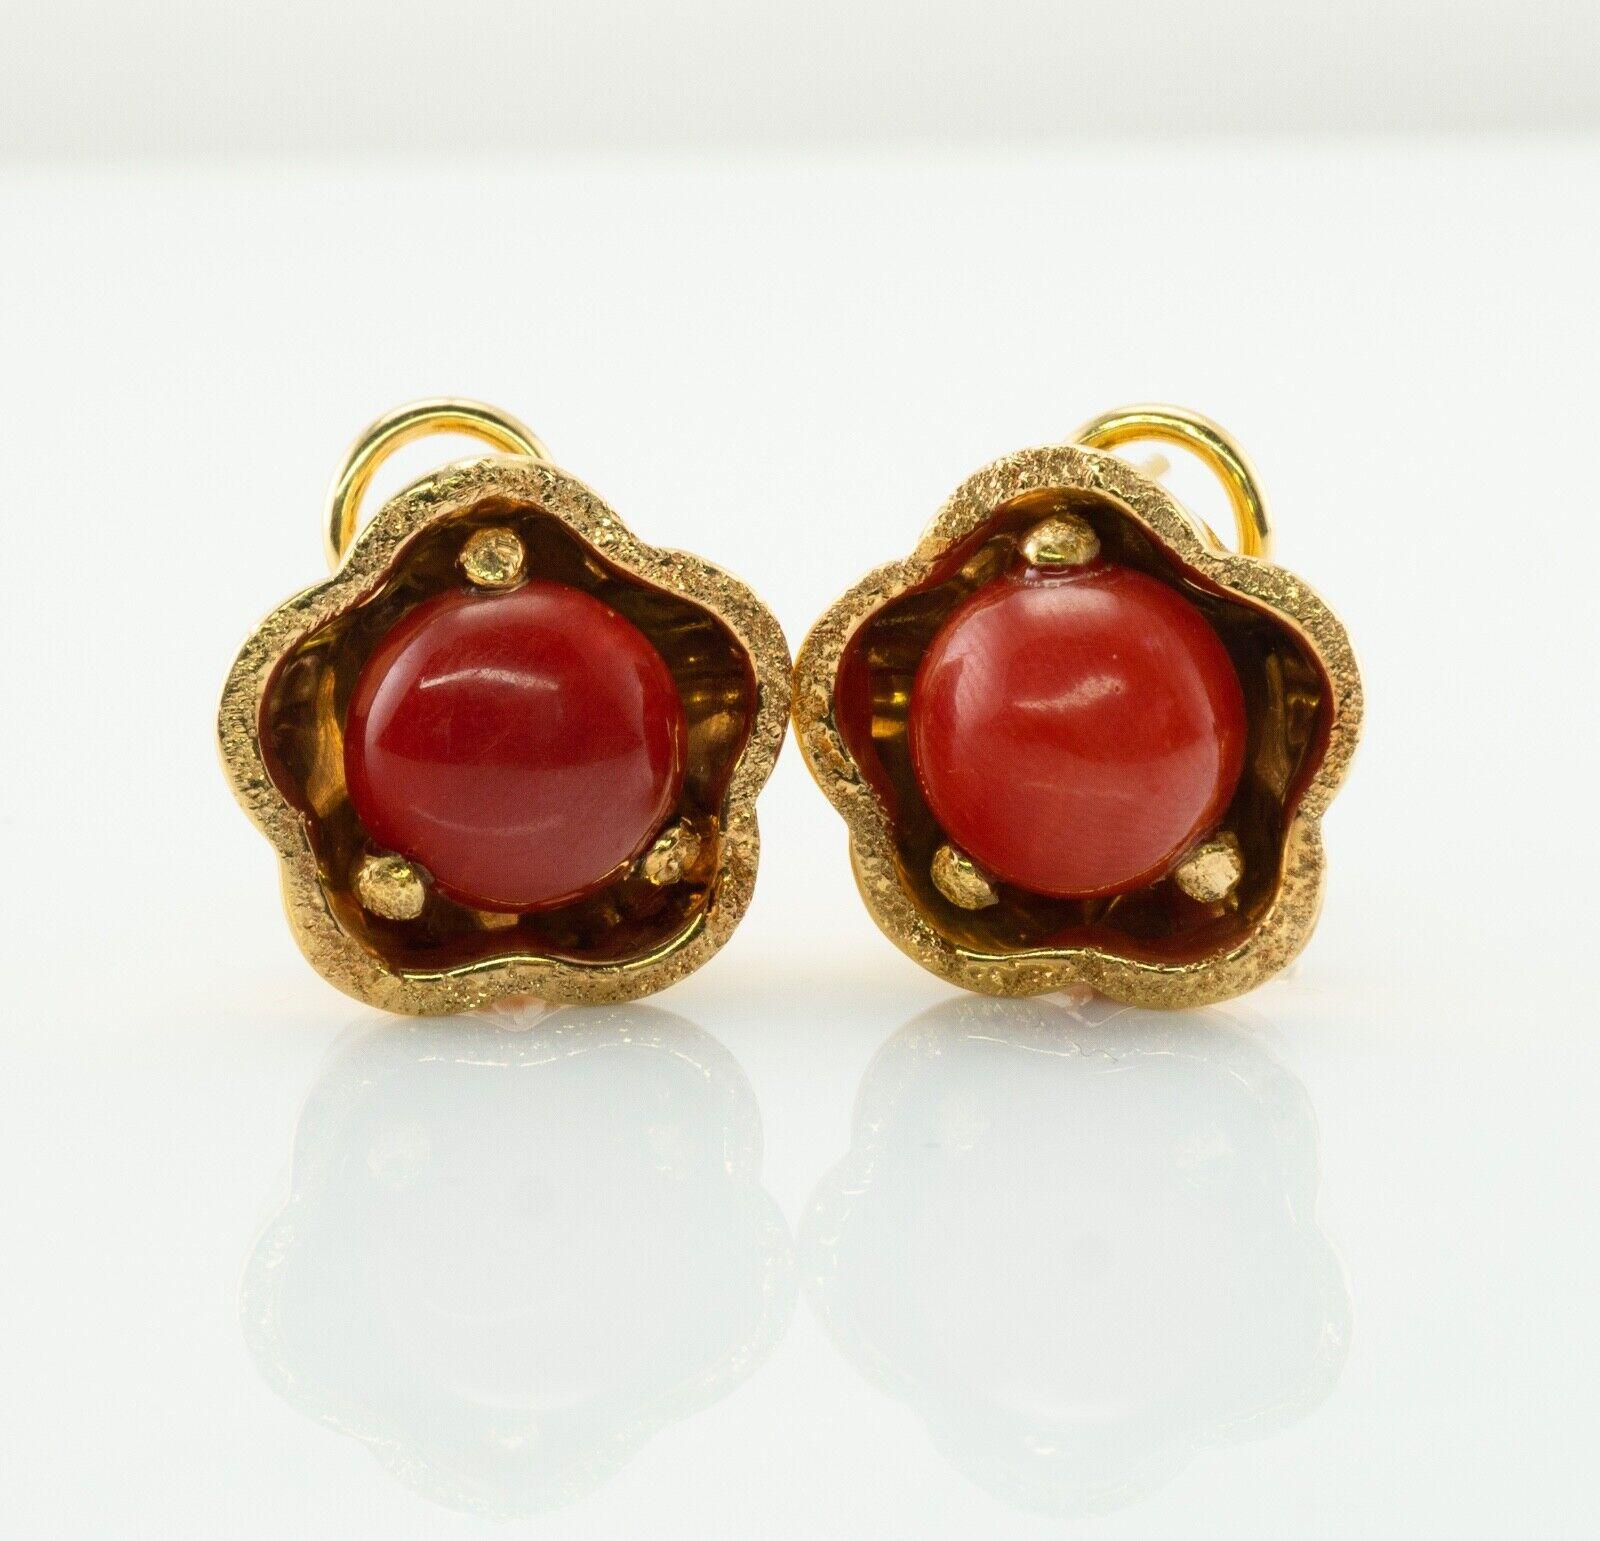 Natural Coral Earrings 18k Gold Italy Omega Backings

This pair of estate earrings is crafted in 18K Yellow gold, made in Italy. Each natural untreated coral cabochon measures 10mm. The setting measures 17mm. The earrings are equipped with a very